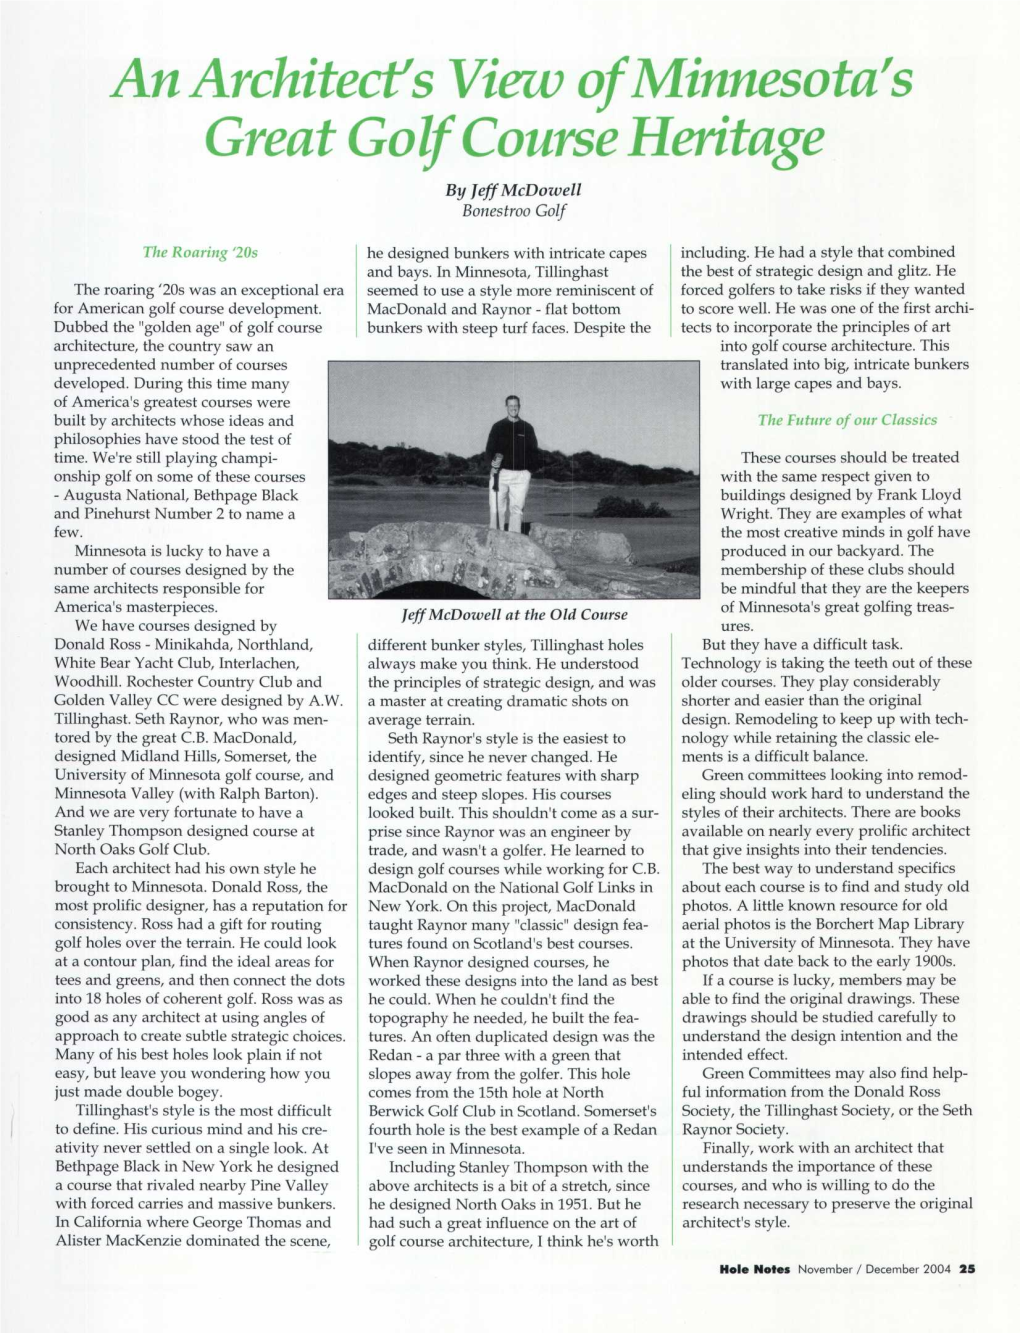 An Architect's View of Minnesota's Great Golf Course Heritage by Jeff Mcdowell Bonestroo Golf